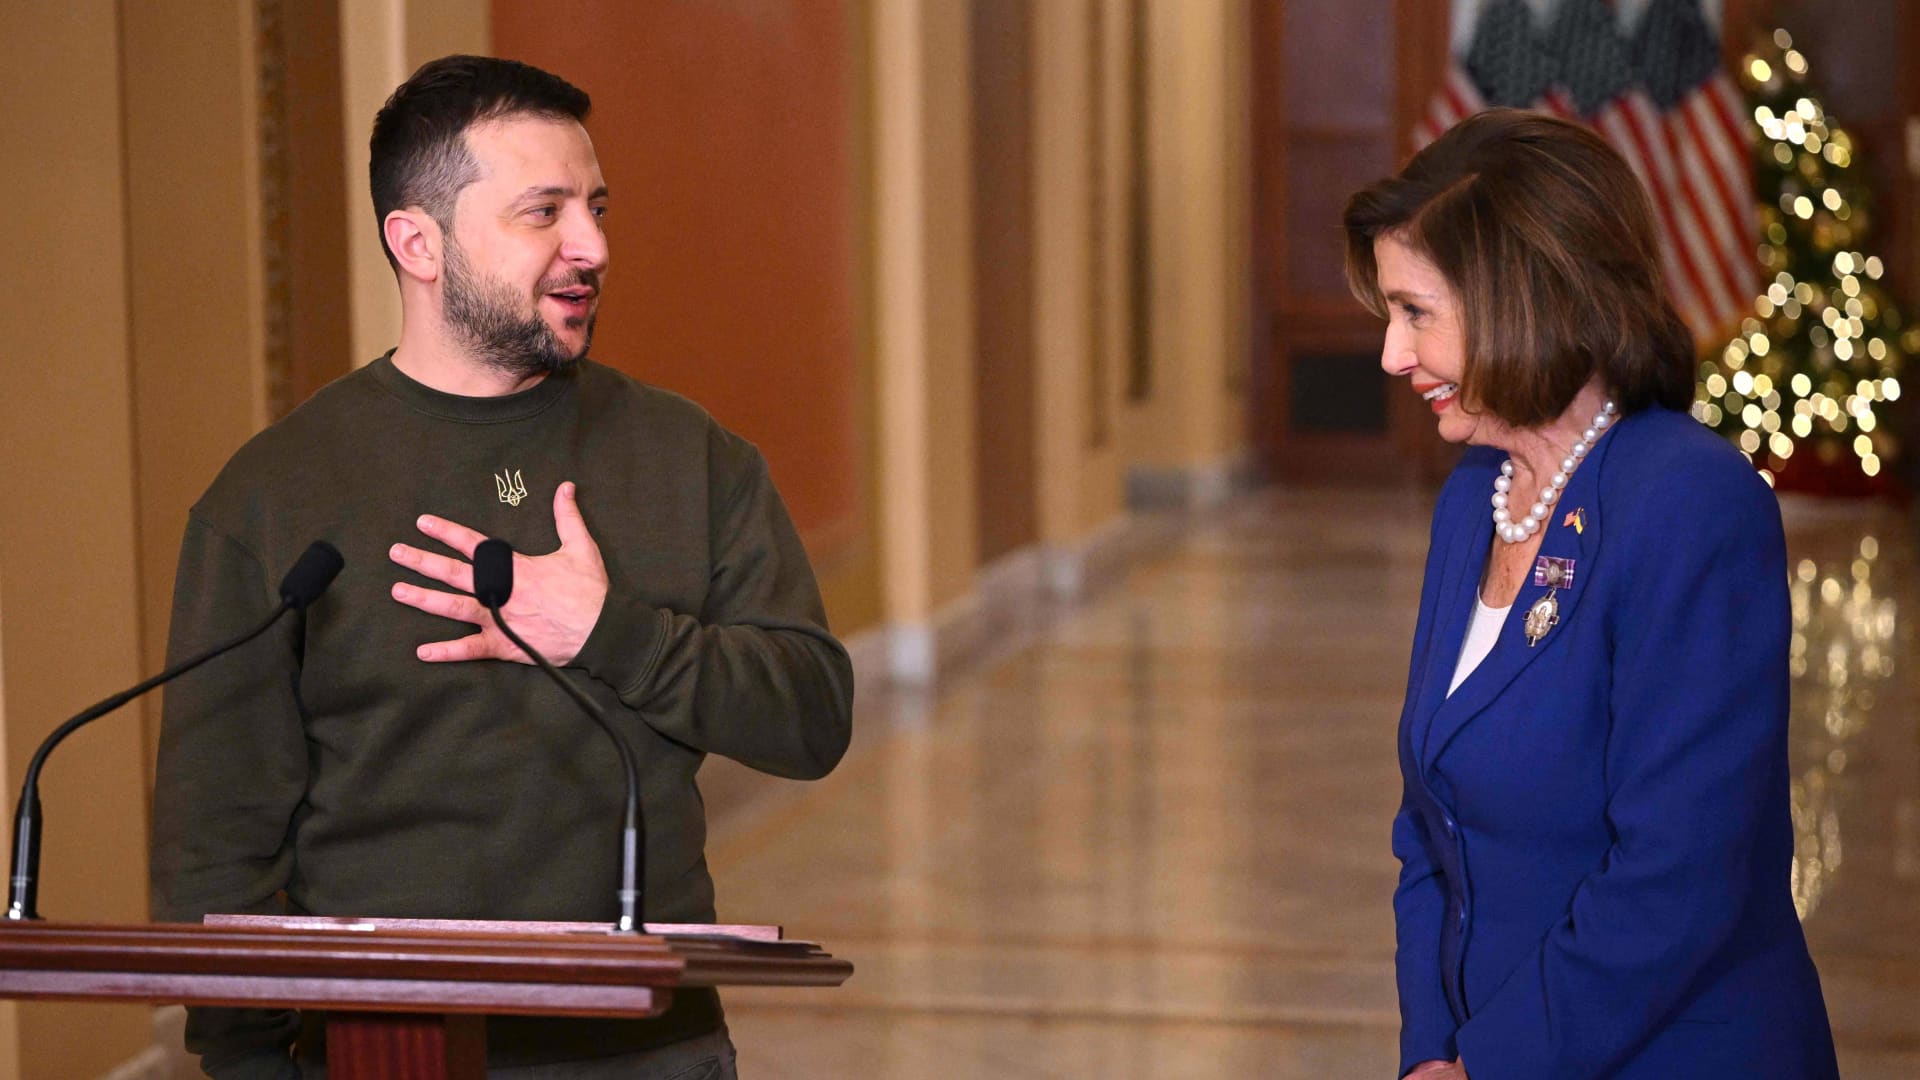 US House Speaker Nancy Pelosi (D-CA) meets with Ukraine's President Volodymyr Zelenskyy at the US Capitol in Washington, DC on December 21, 2022. 